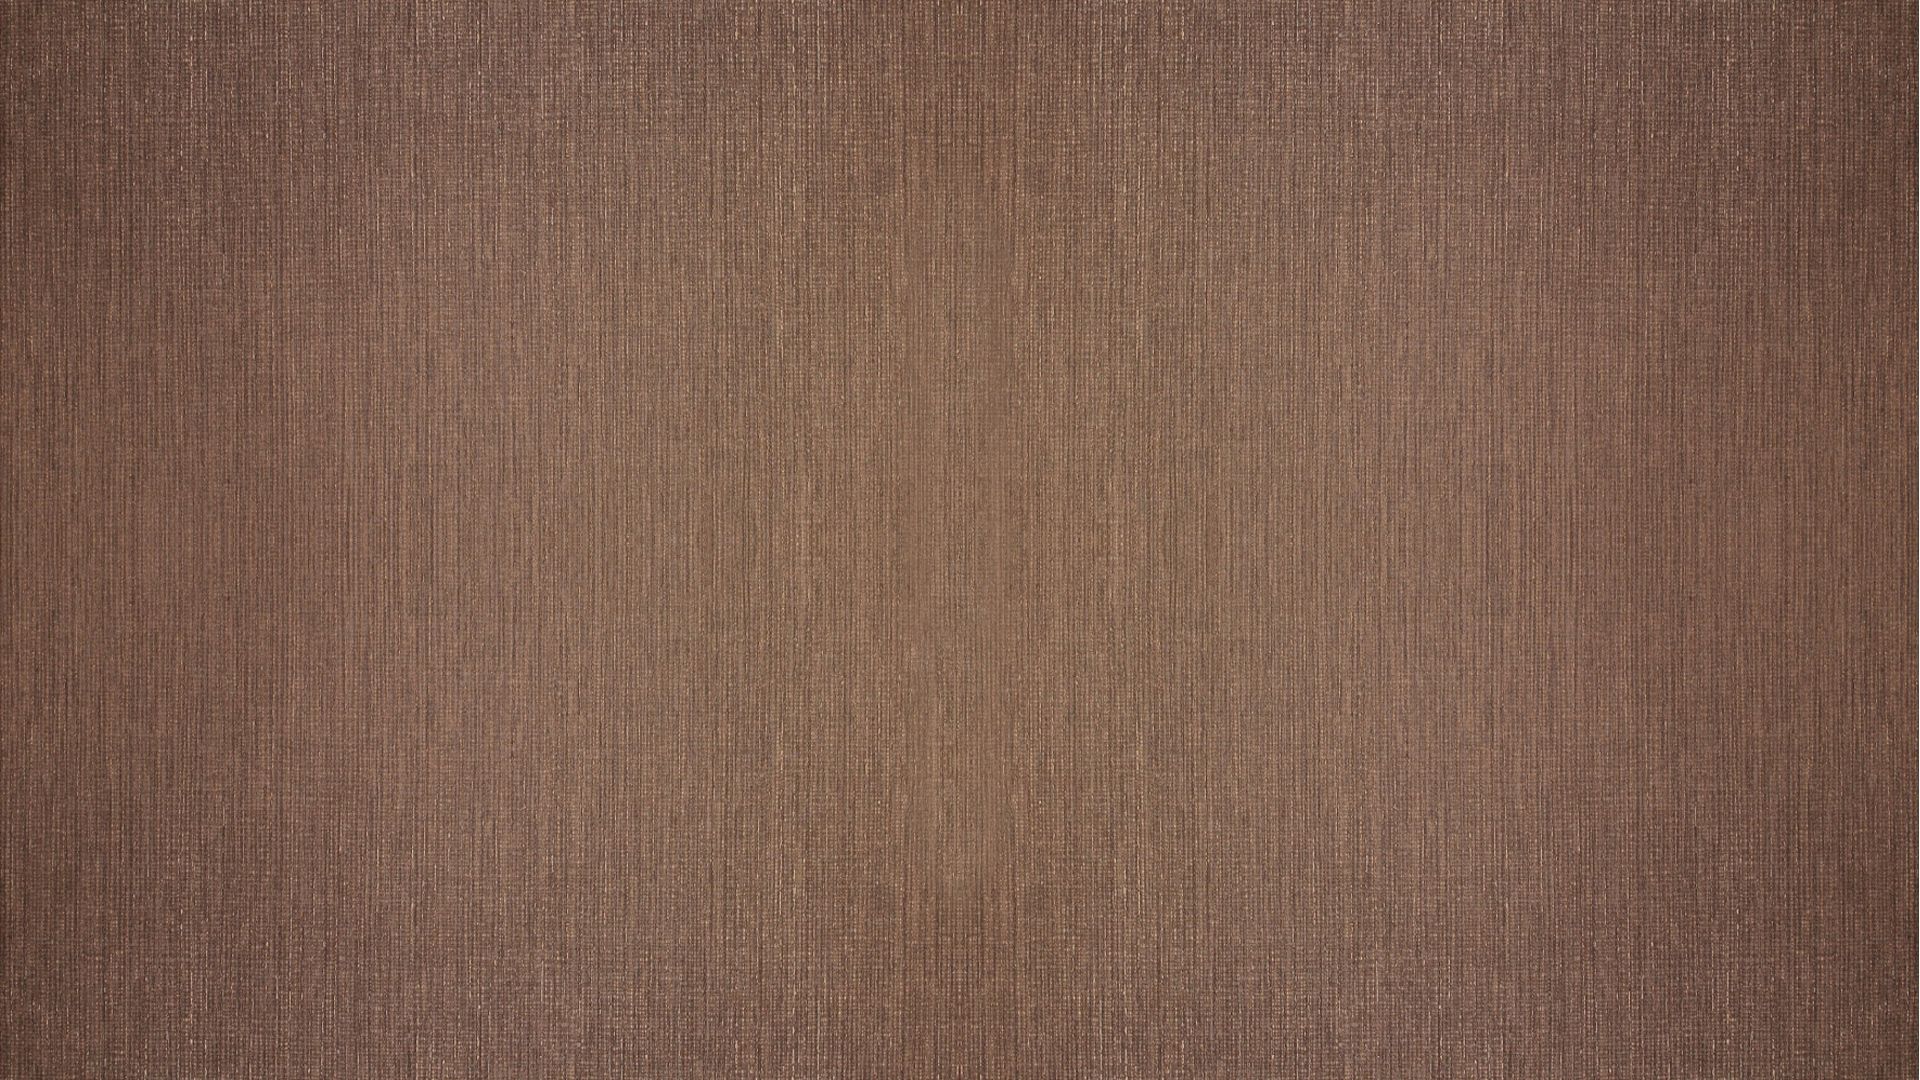 brown, textures, texture, surface, faded wallpaper for mobile